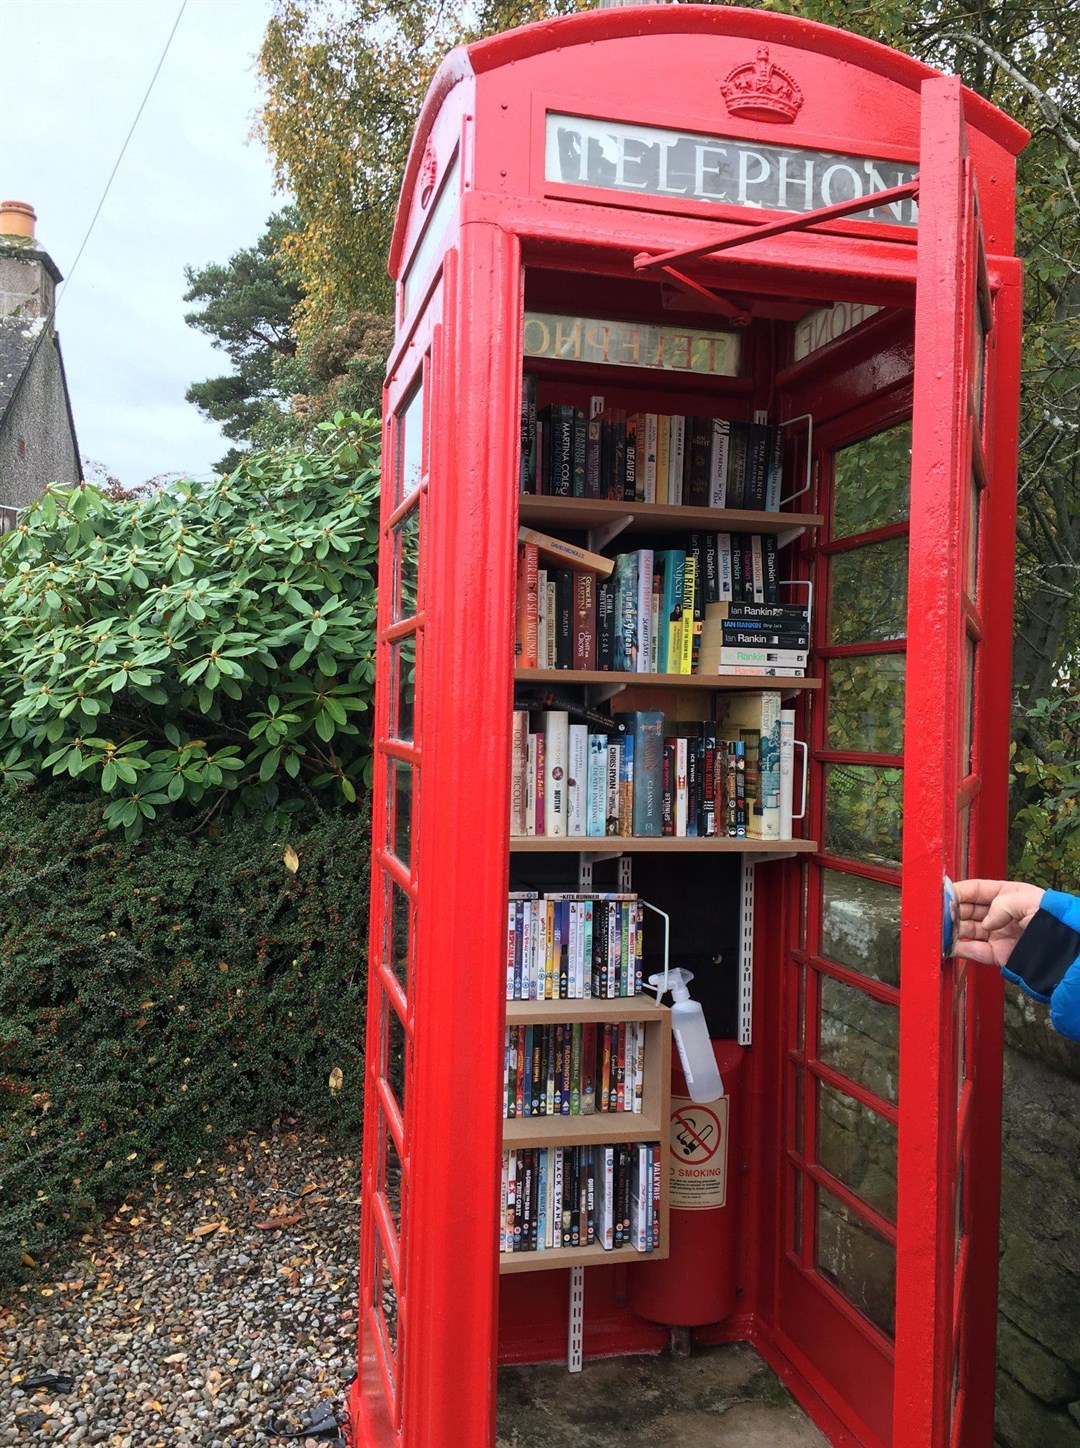 The distinctive red phone box has been given a new life.